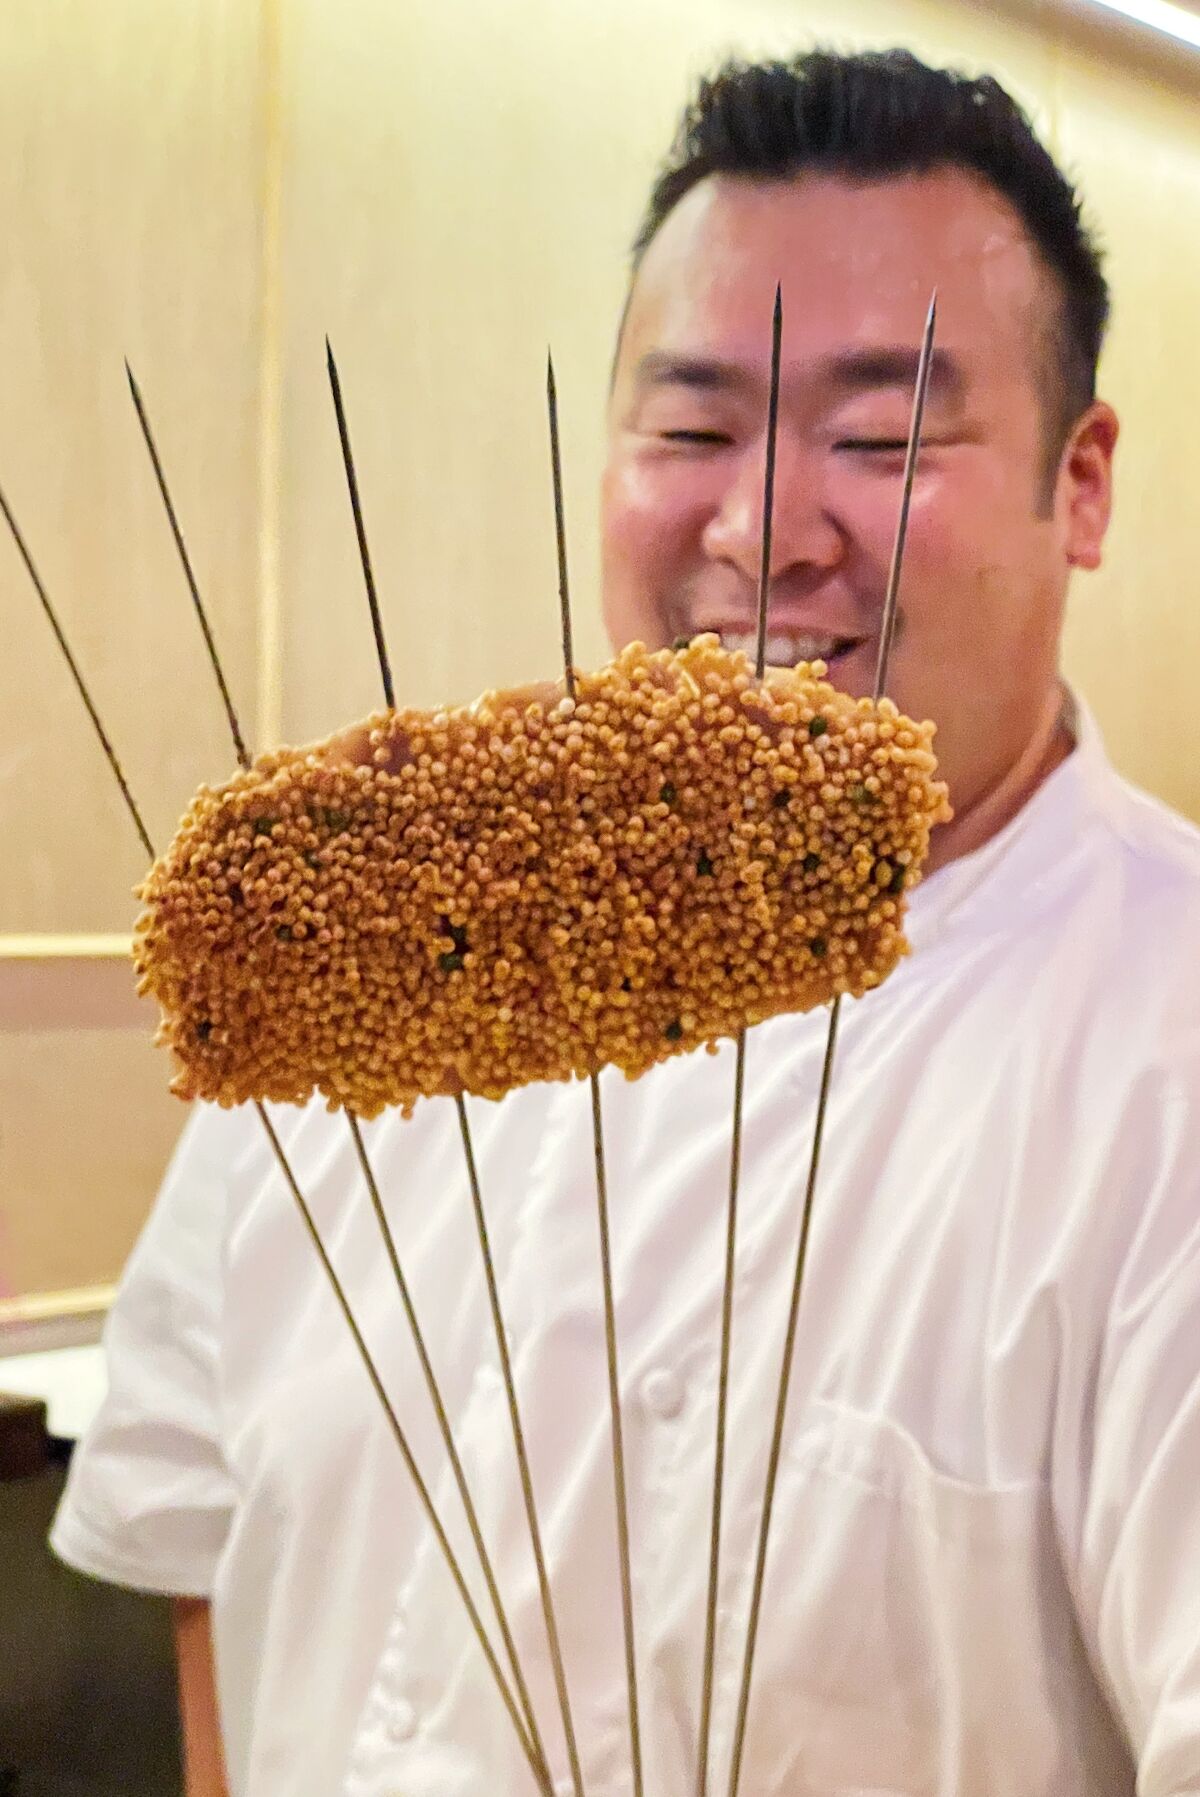 Chef-owner Daniel Son holds a piece of grilled fish that's been coated in puffy rice crackers at Sushi Sonagi in Gardena